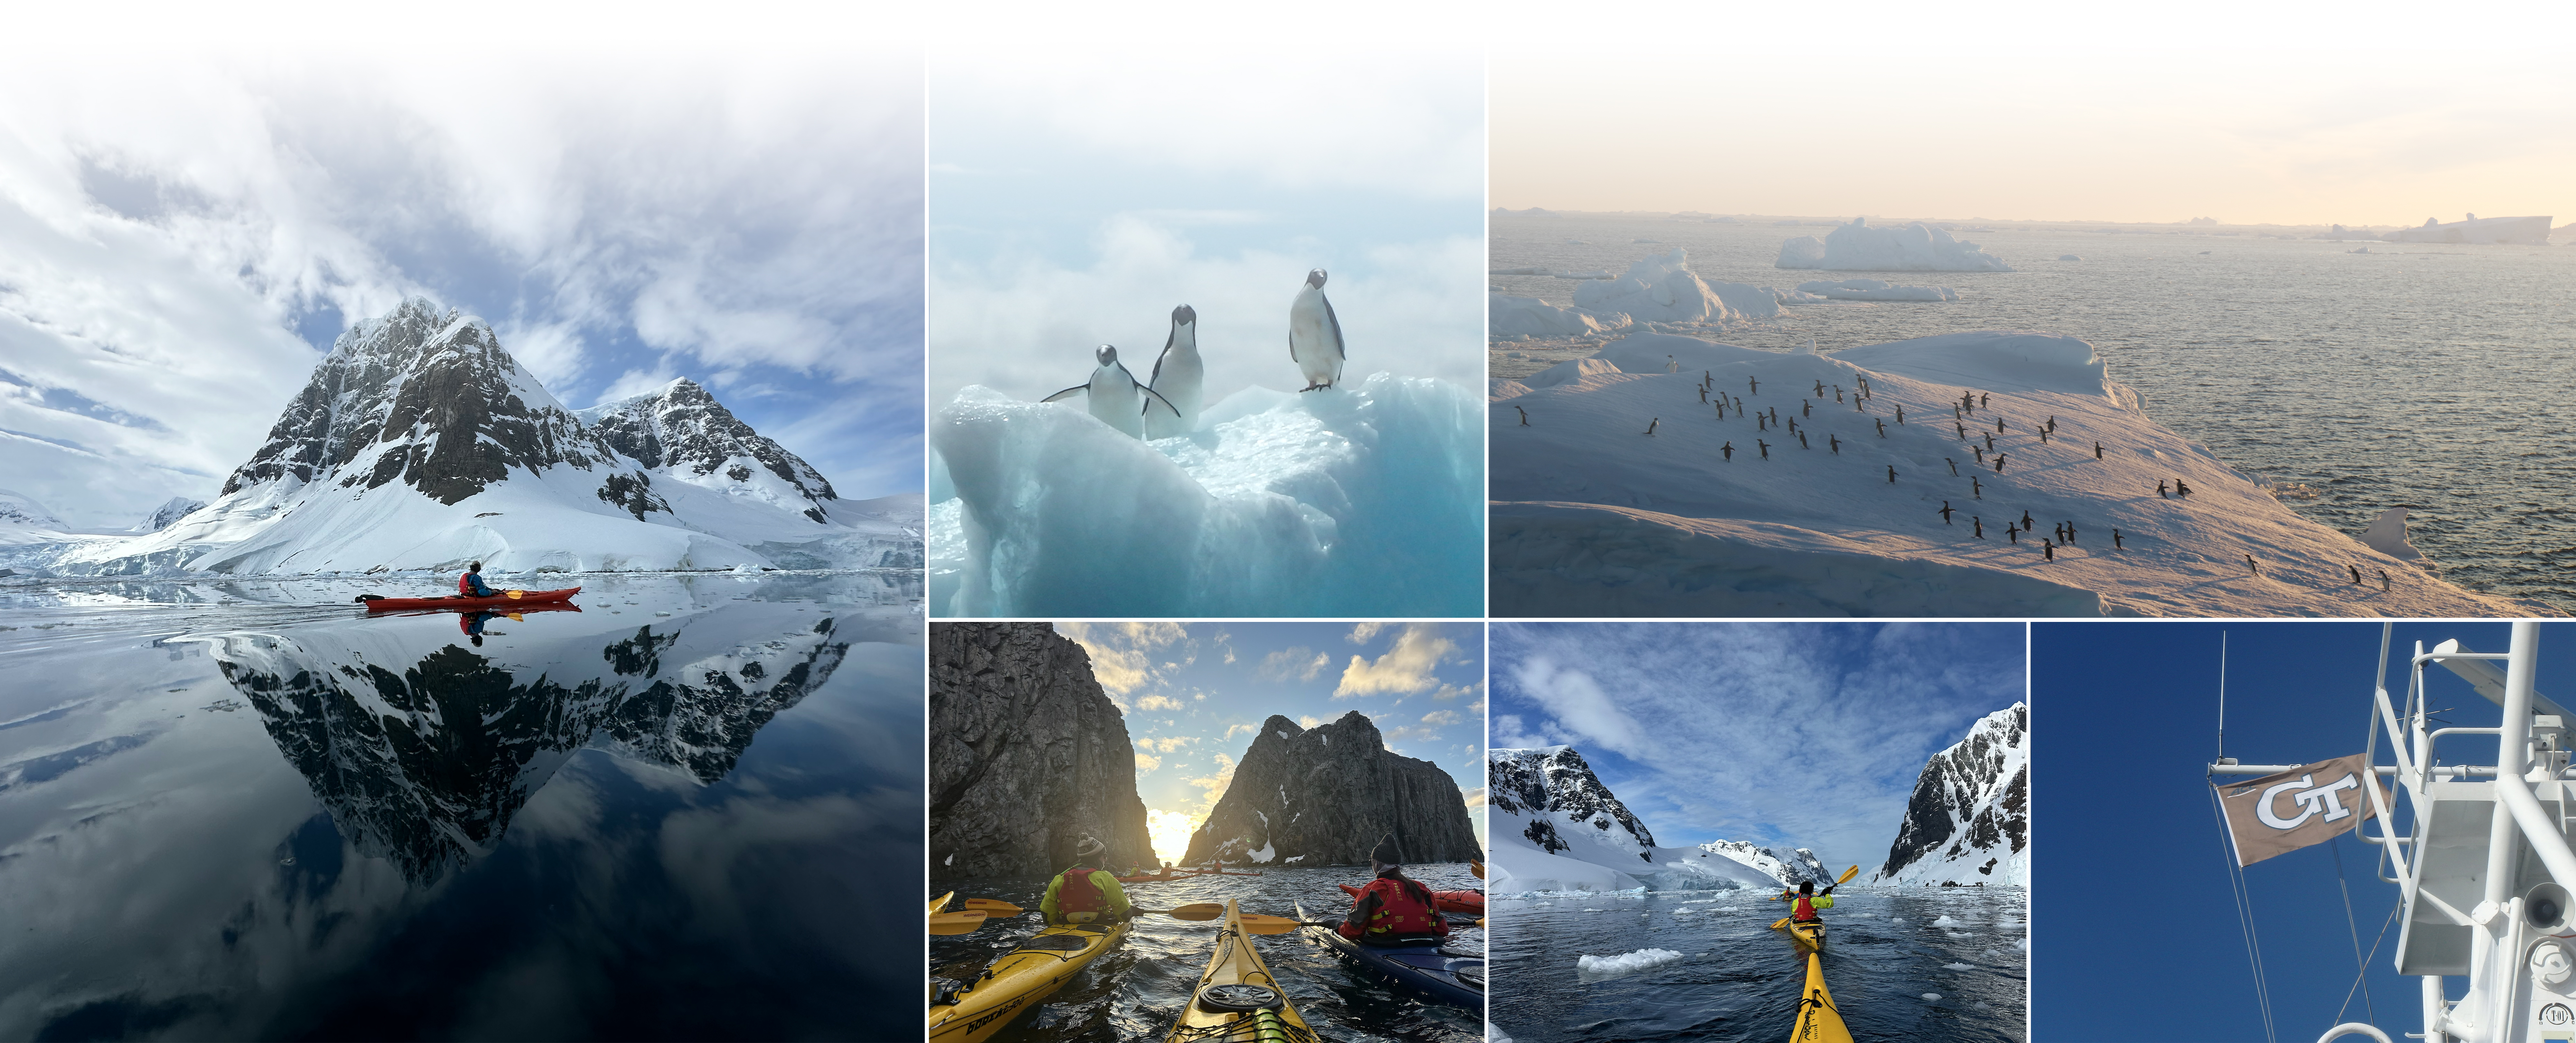 Collage of images from students kayaking in Antarctica and penguins on icebergs.